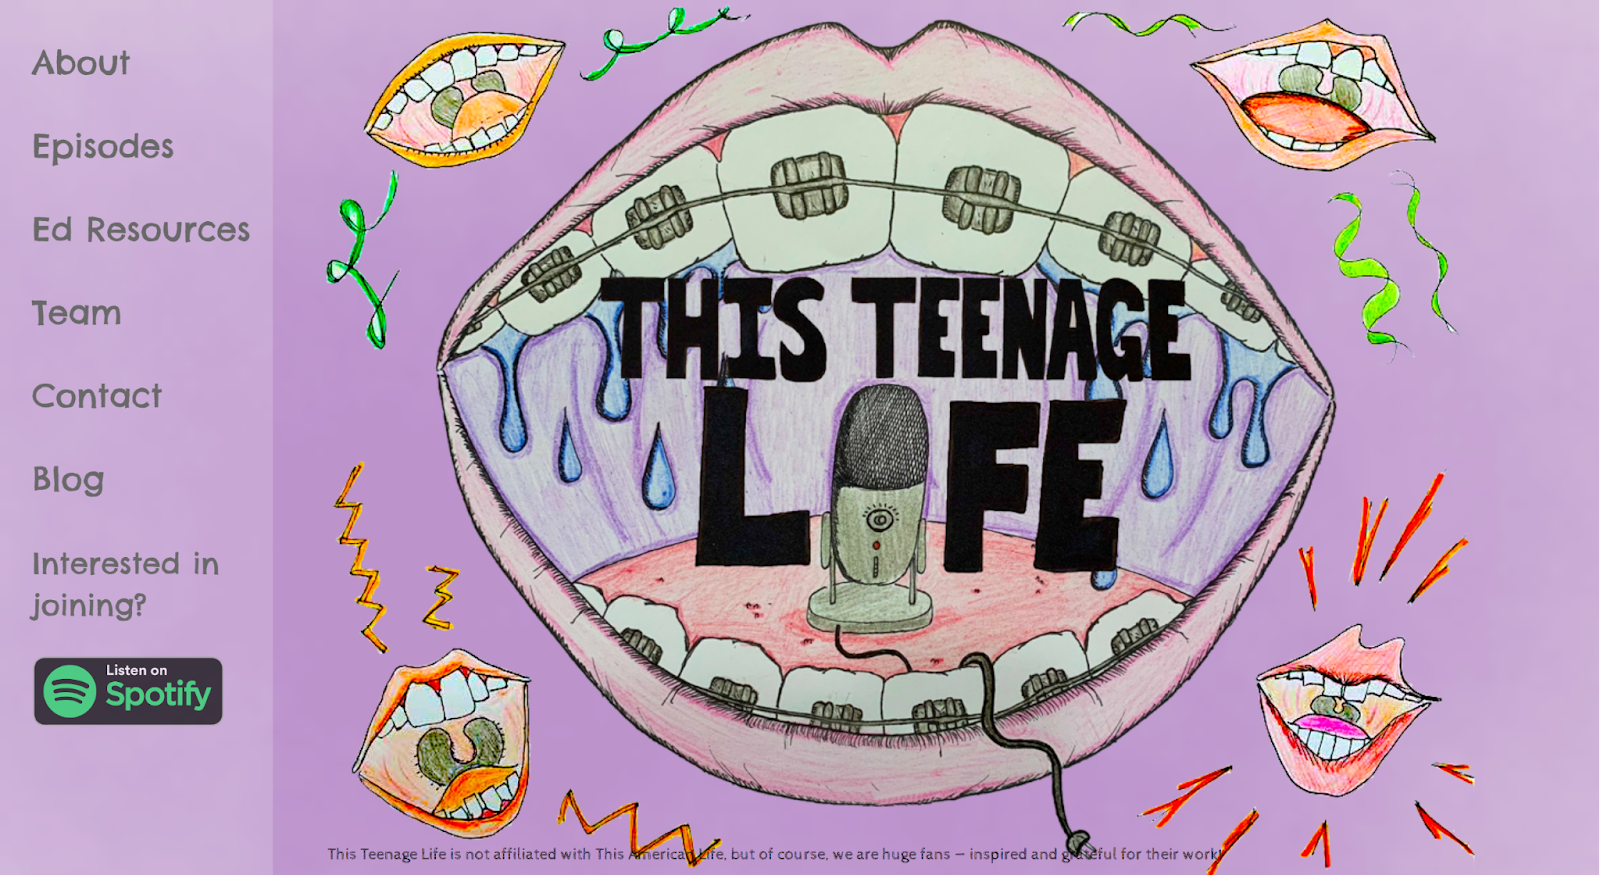 "This Teenage Life" is a community of young individuals who share their experiences.